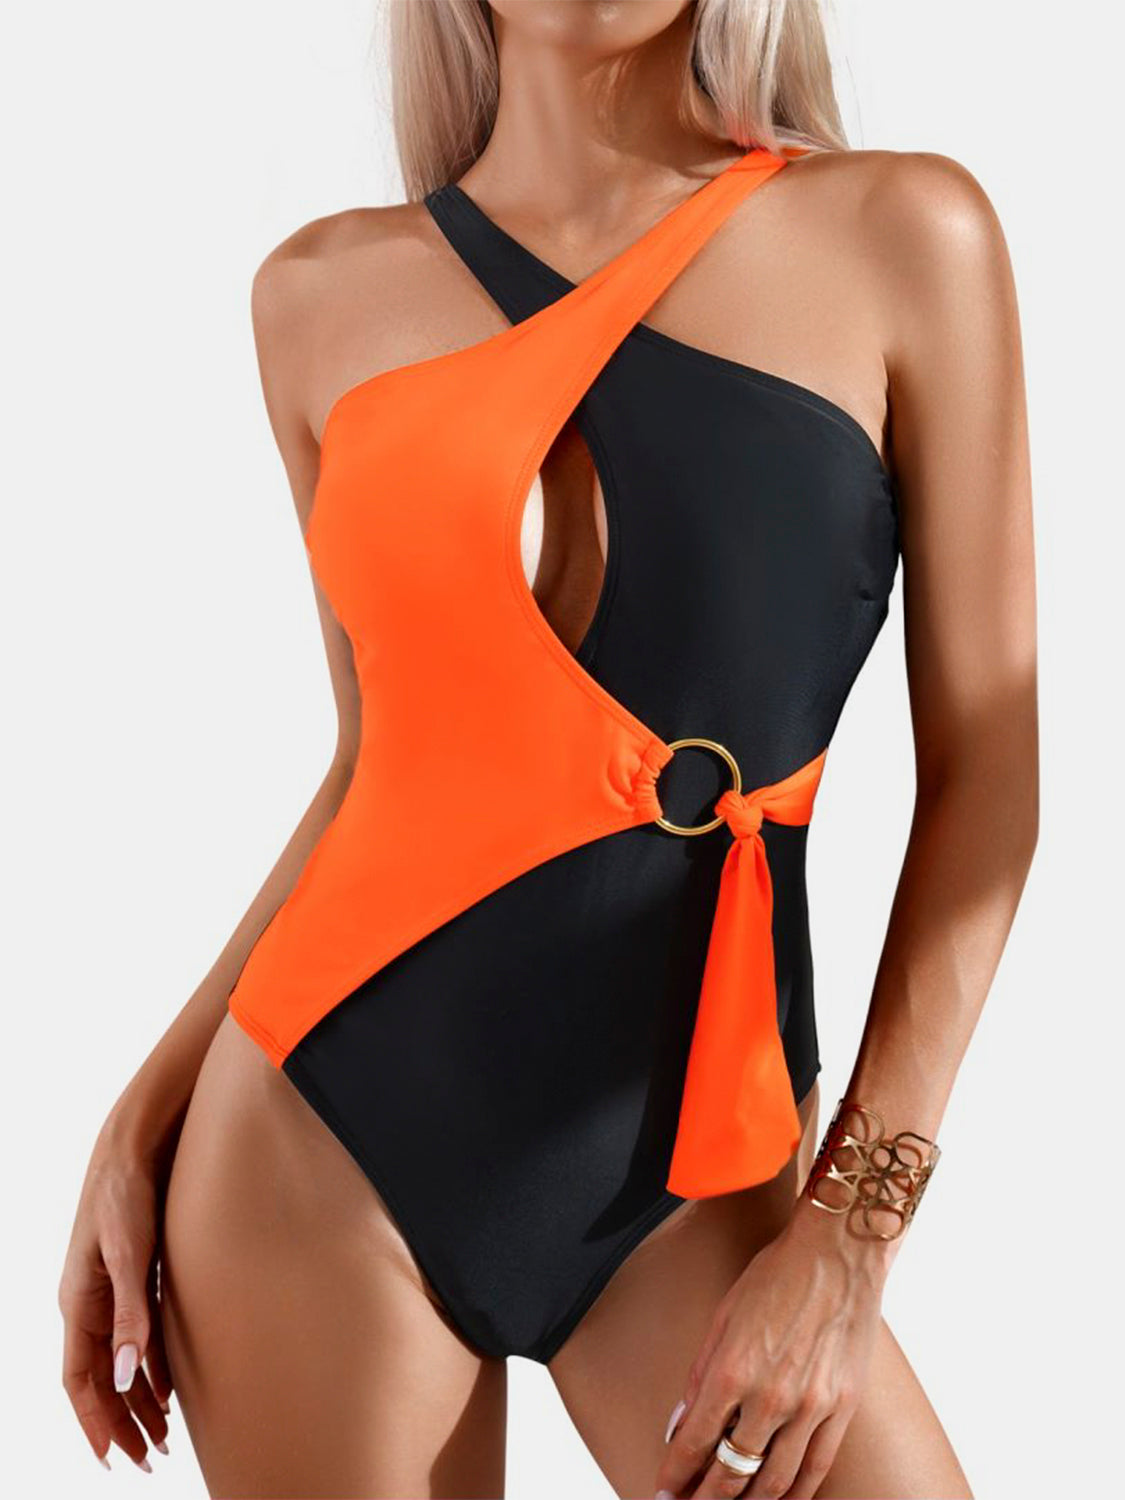 one piece swimsuit, one piece bikini, one piece bathing suit, black and orange swimsuit, classy bikini, classy one piece bathing suits, nice bathing suits, designer one piece swimsuit, trending swimsuits, affordable designer swimsuits, cute bathing suits, cute swimsuits, tiktok swim, tiktok fashion, kesley boutique, birthday gifts, vacation fashion, luxury swimsuit, nylon swimsuits, classy swimsuits, good quality swimwear, slimming swimsuits, slimming bathing suits, stretchy bathing suits